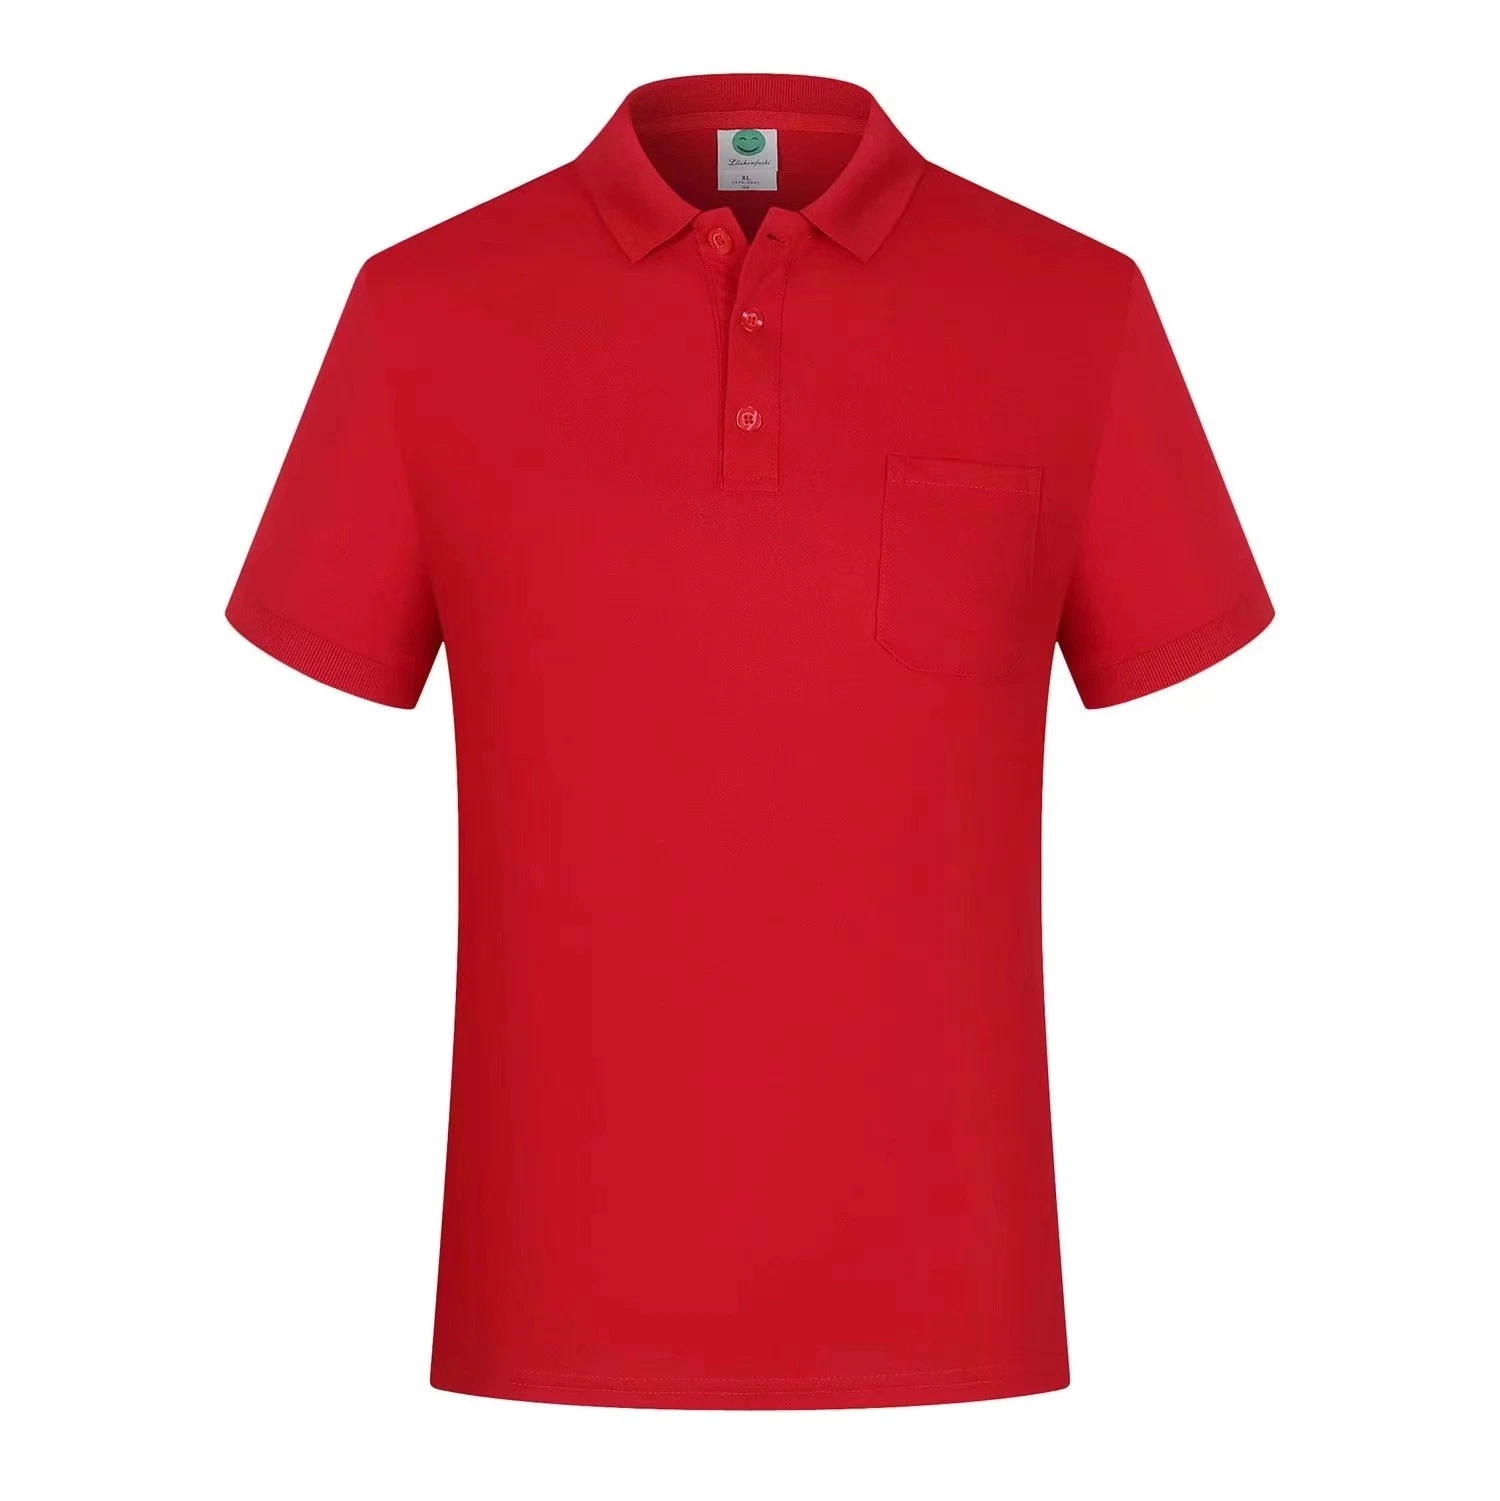 Printing T-Shirt Work Clothes Unisex Polo Shirt with Pocket